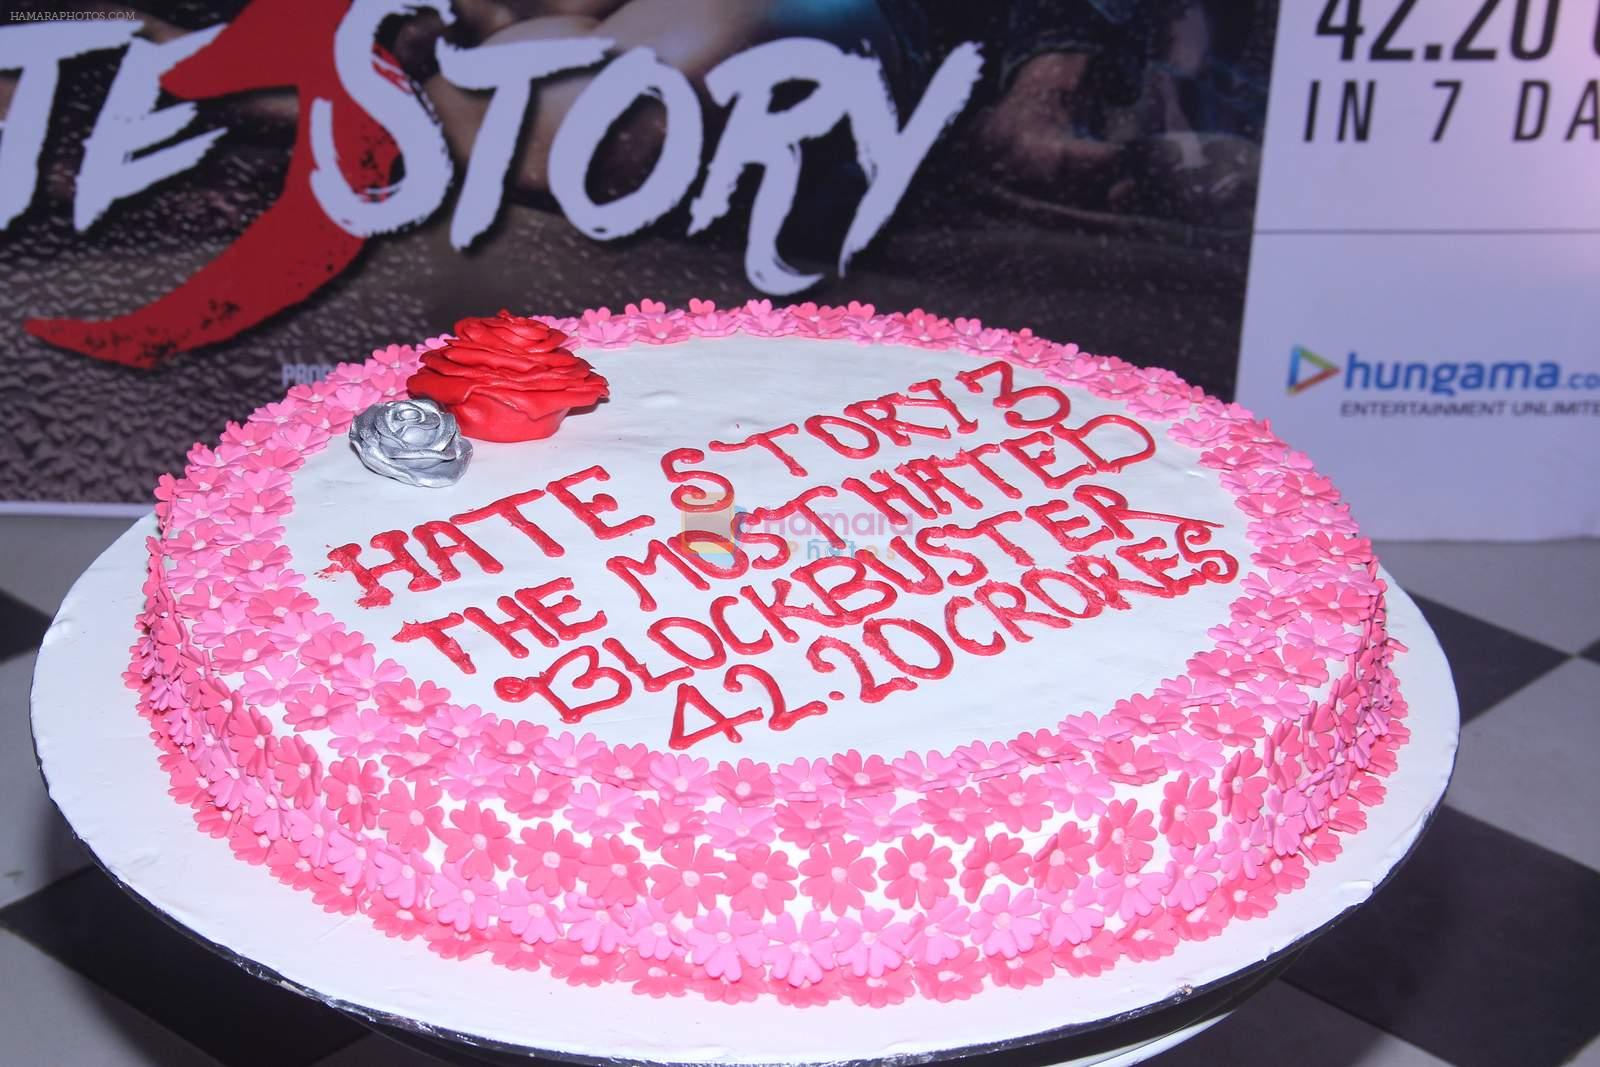 at HATE STORY 3 SUCCESS PARTY on 11th Dec 2015